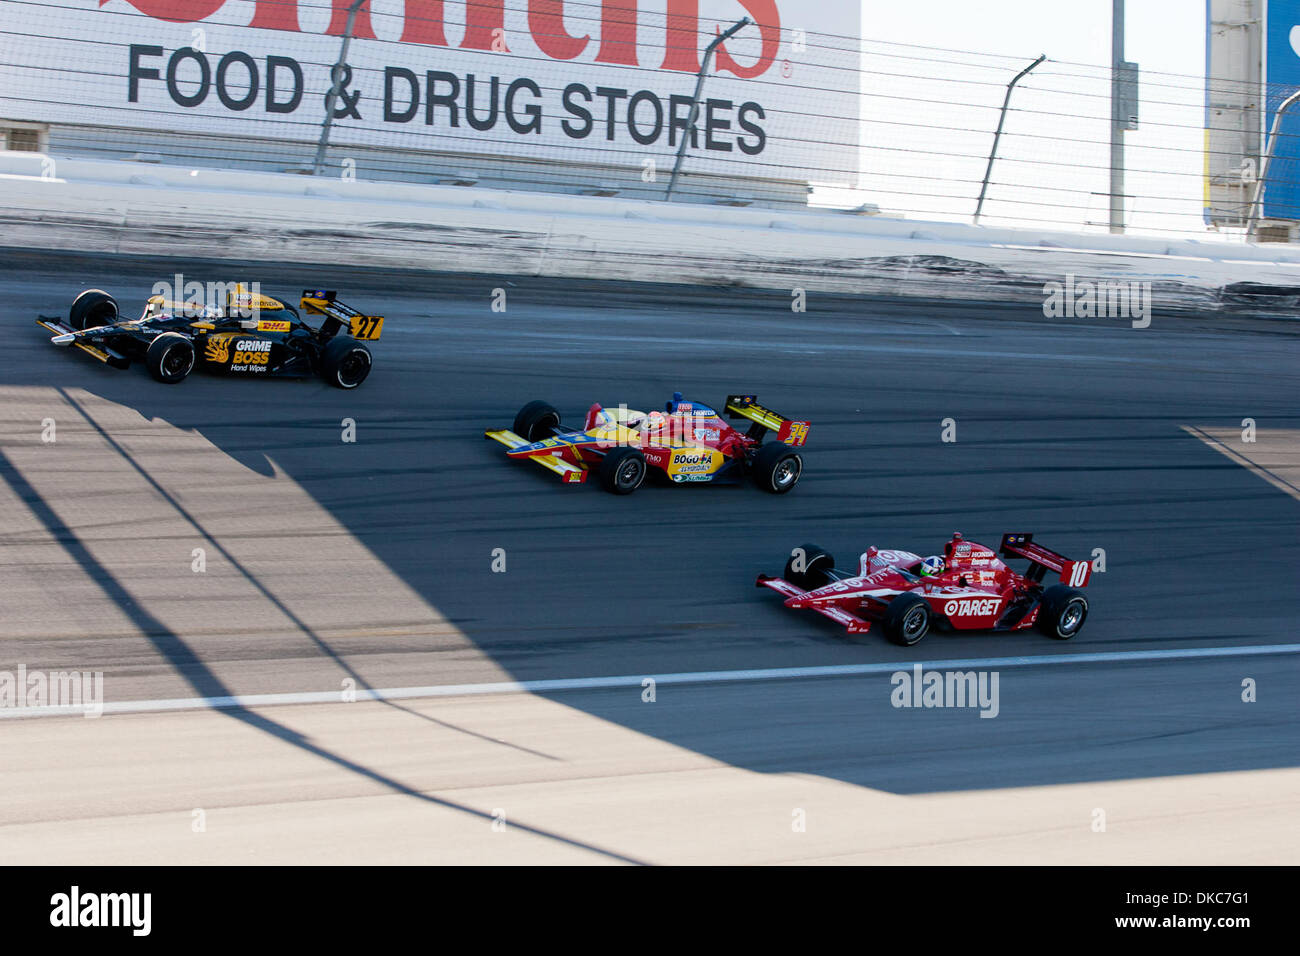 Oct. 16, 2011 - Las Vegas, Nevada, U.S - Upon news of Dan Wheldon's death, the rest of the drivers performed a five lap honor to Wheldon to conclude the race at the IZOD IndyCar World Championships at Las Vegas Motor Speedway in Las Vegas, Nevada.  No race winner was announced and Dario Franchitti was named the 2011 IZOD IndyCar World Champion. (Credit Image: © Matt Gdowski/Southcr Stock Photo